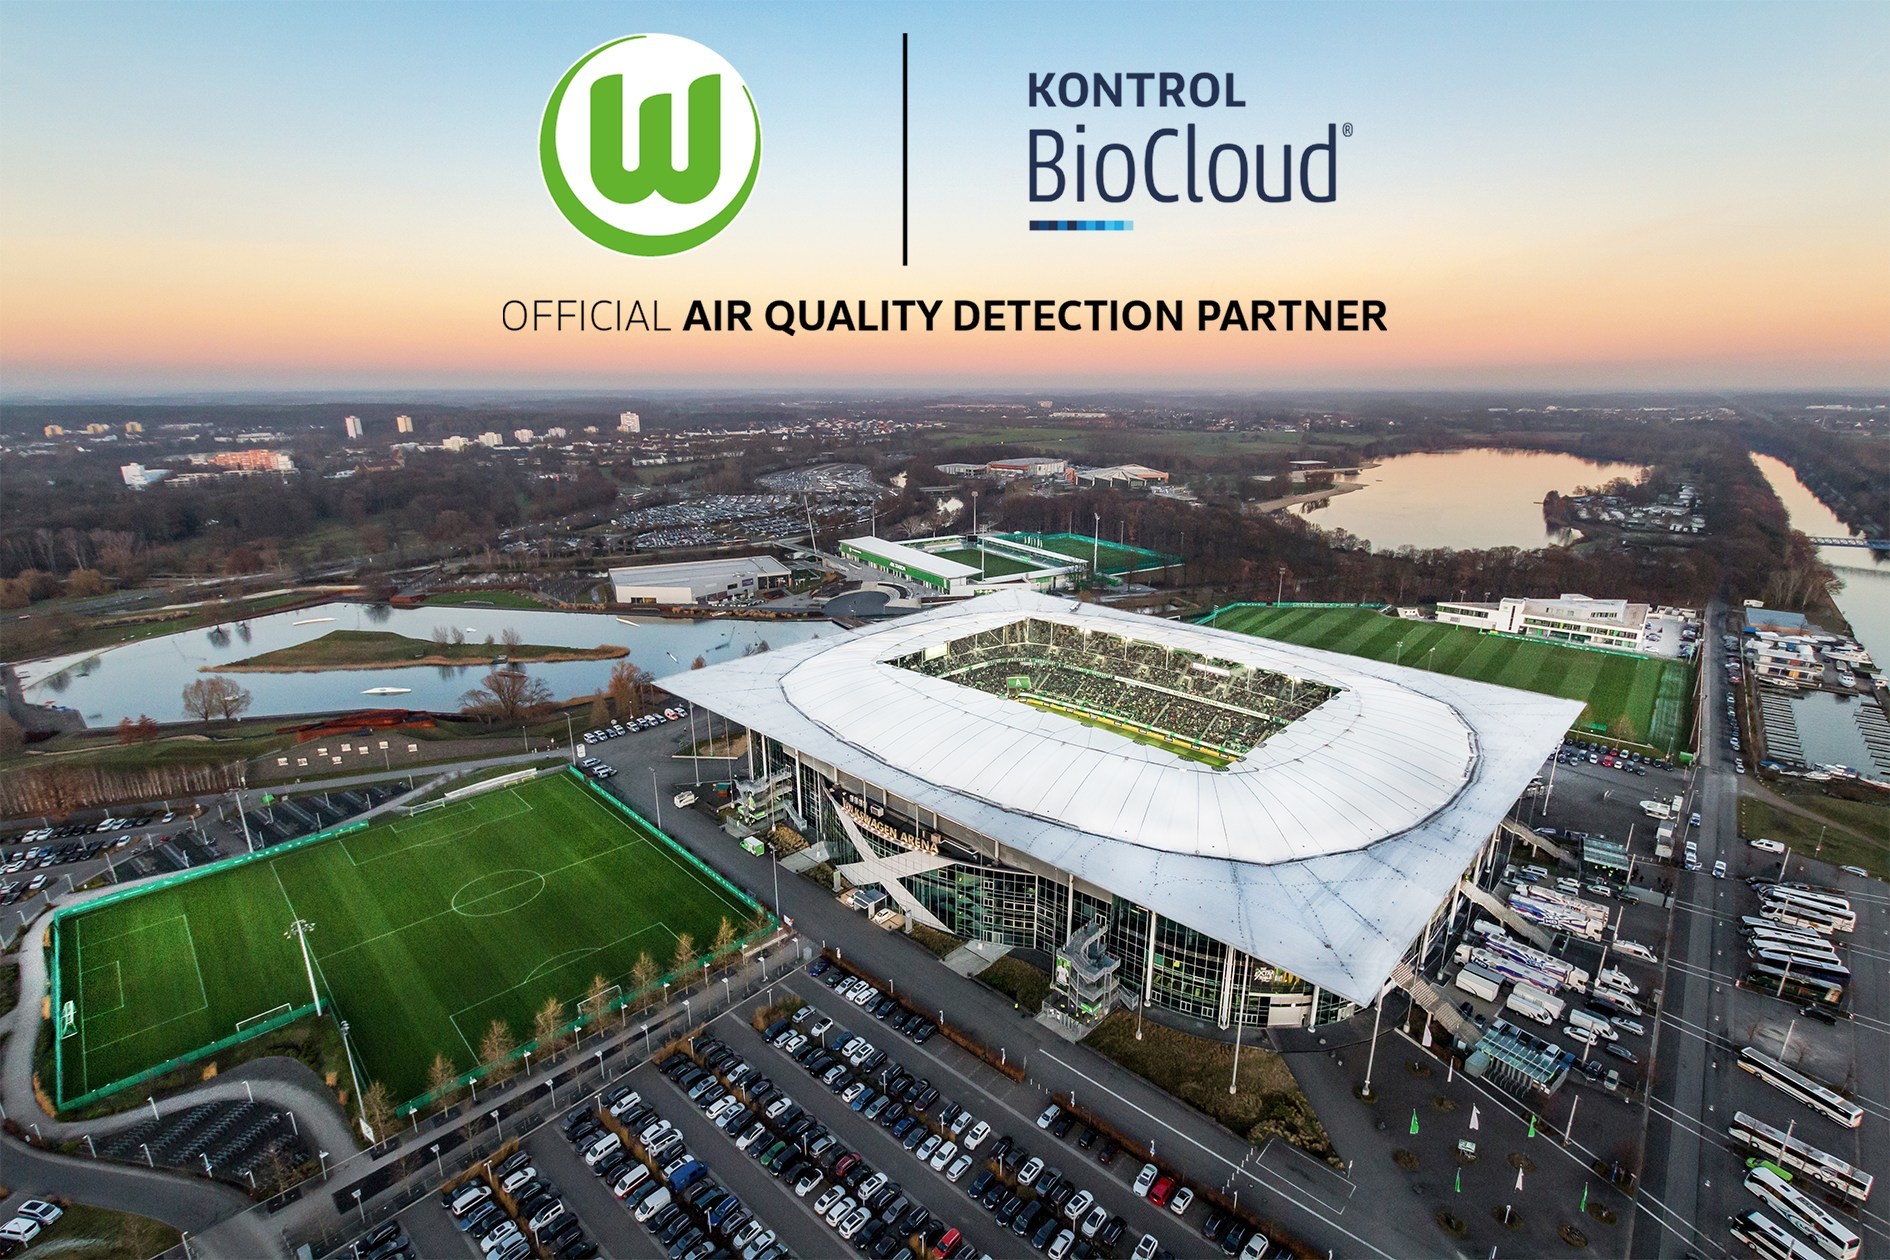 Kontrol BioCloud is the Official Air Quality Detection Partner for professional German Soccer Team VfL Wolfsburg (CNW Group/Kontrol Technologies Corp.)